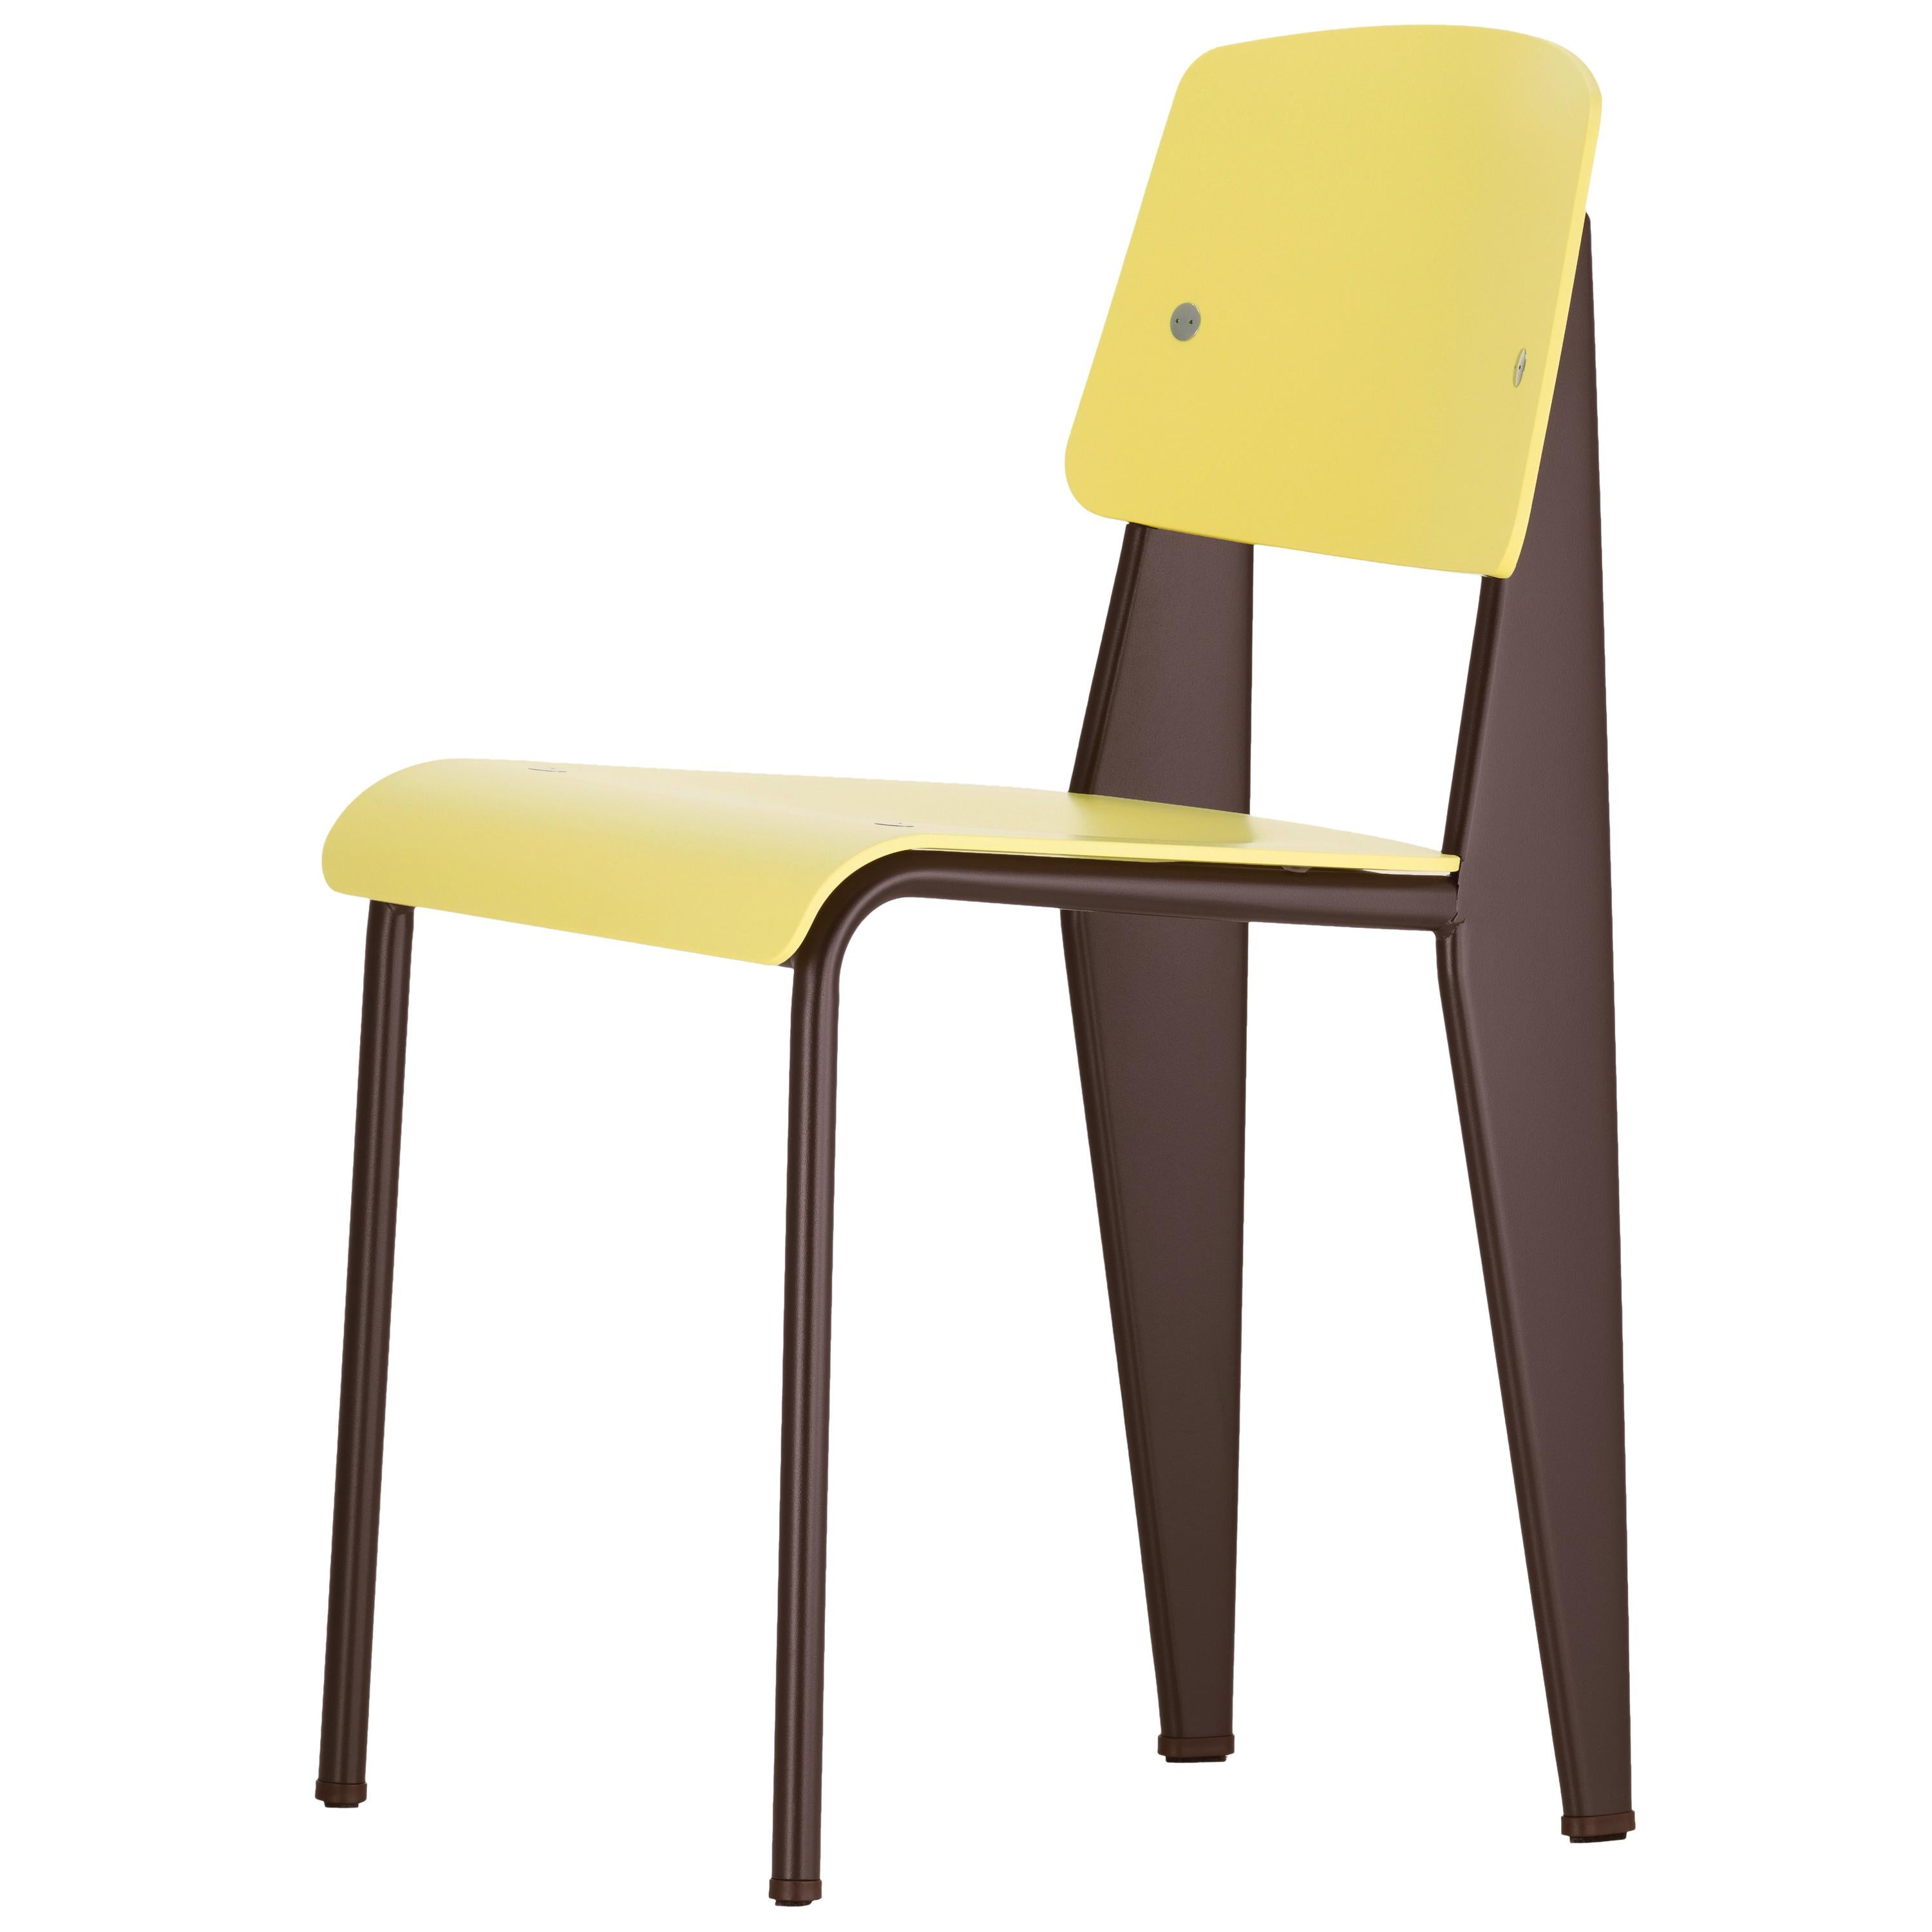 Vitra Standard SP Chair in Citron & Chocolate by Jean Prouvé For Sale